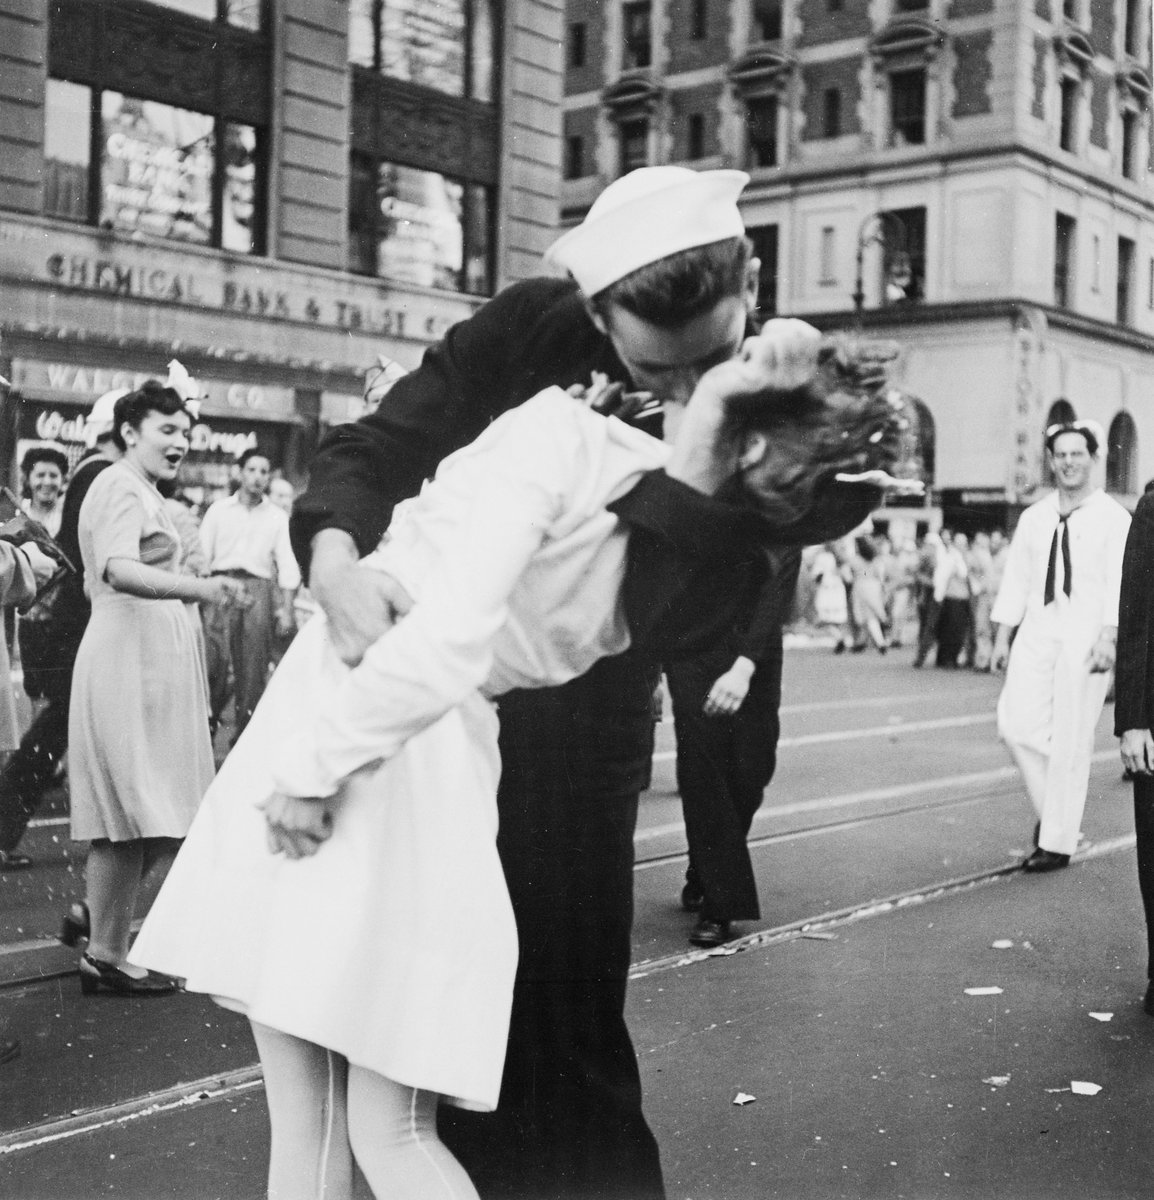 V-J Day Kiss in Time Square 1945 for sale linda-howes.pixels.com/featured/v-j-d… #VJDayKissinTimeSquare1945 #famousKiss #iconicphoto #WorldWar2EndCelebration #TimeSquareVJDay #EndofWarCelebration #SailorandNurseKissTimeSquare1945 #homedecor #IconicKiss #NewYorkCity1945